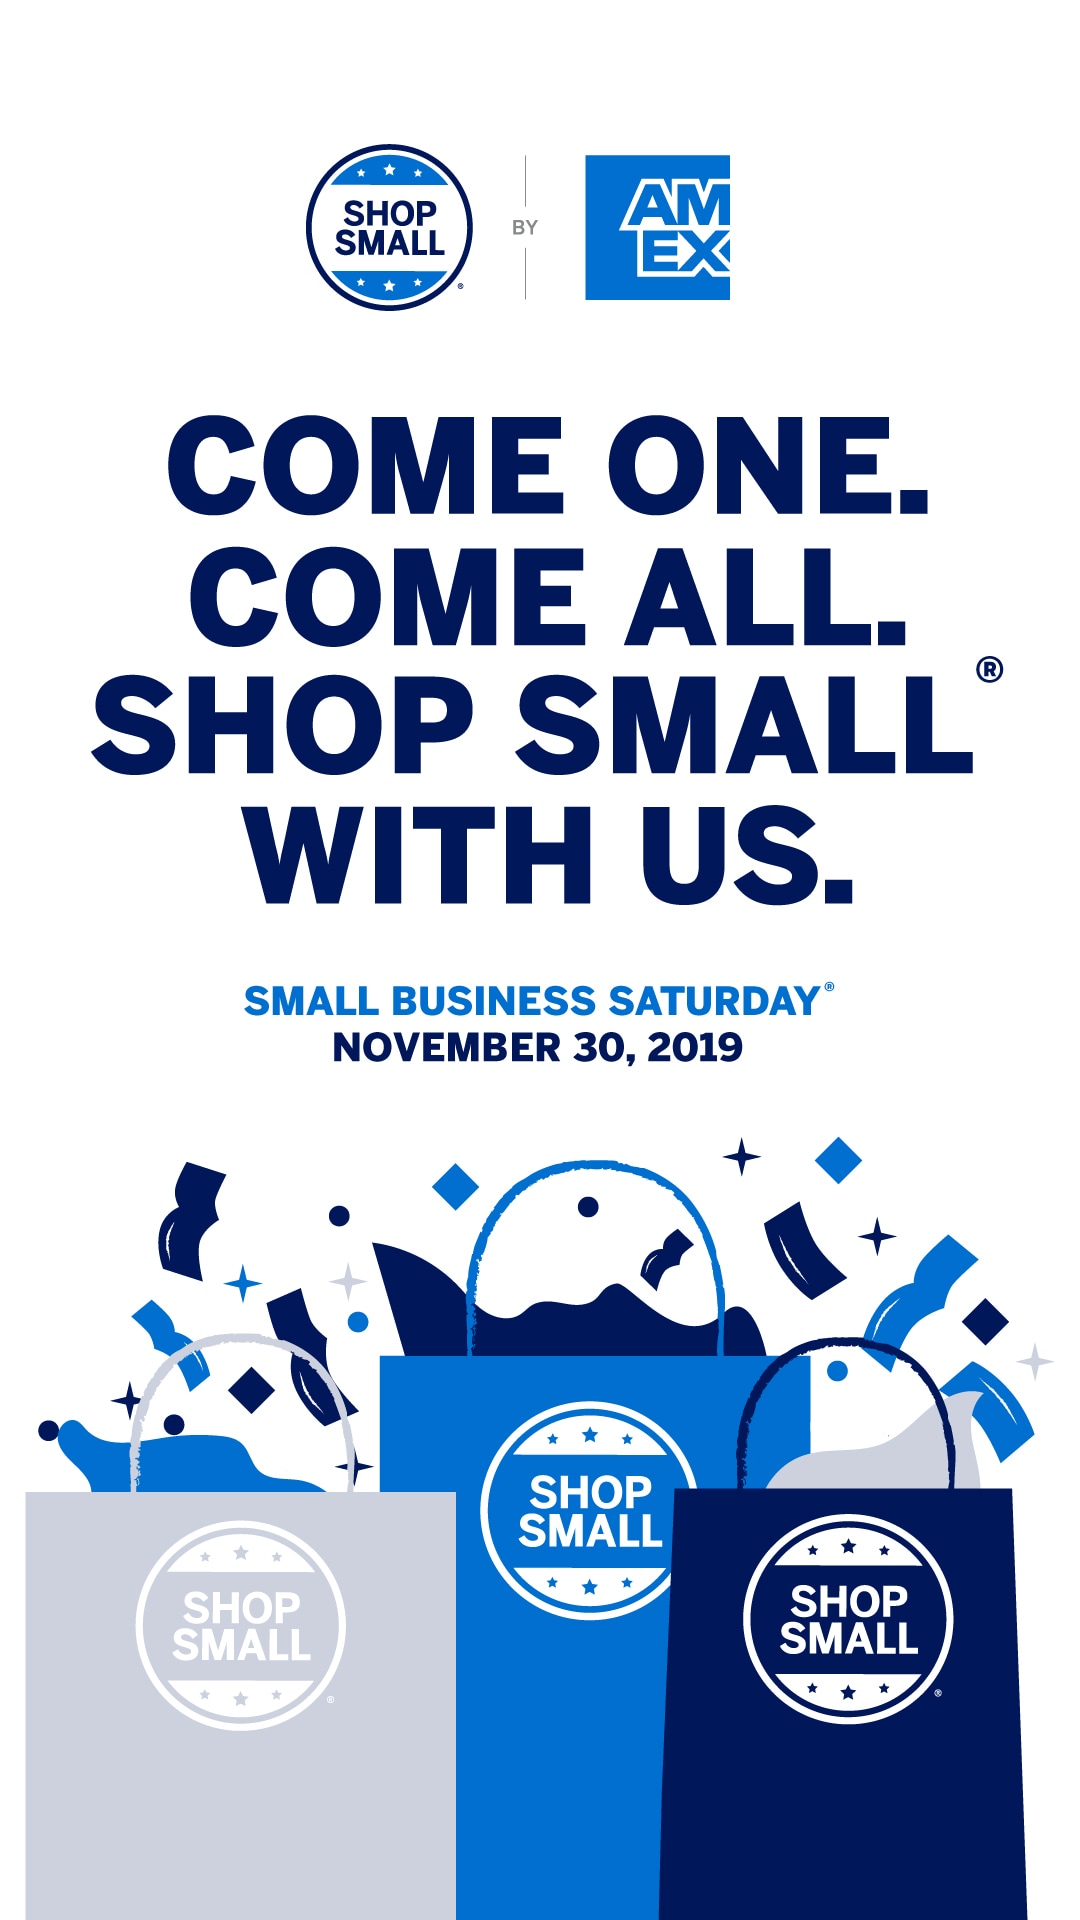 ⭐️Today is Small Business Saturday 2019⭐️